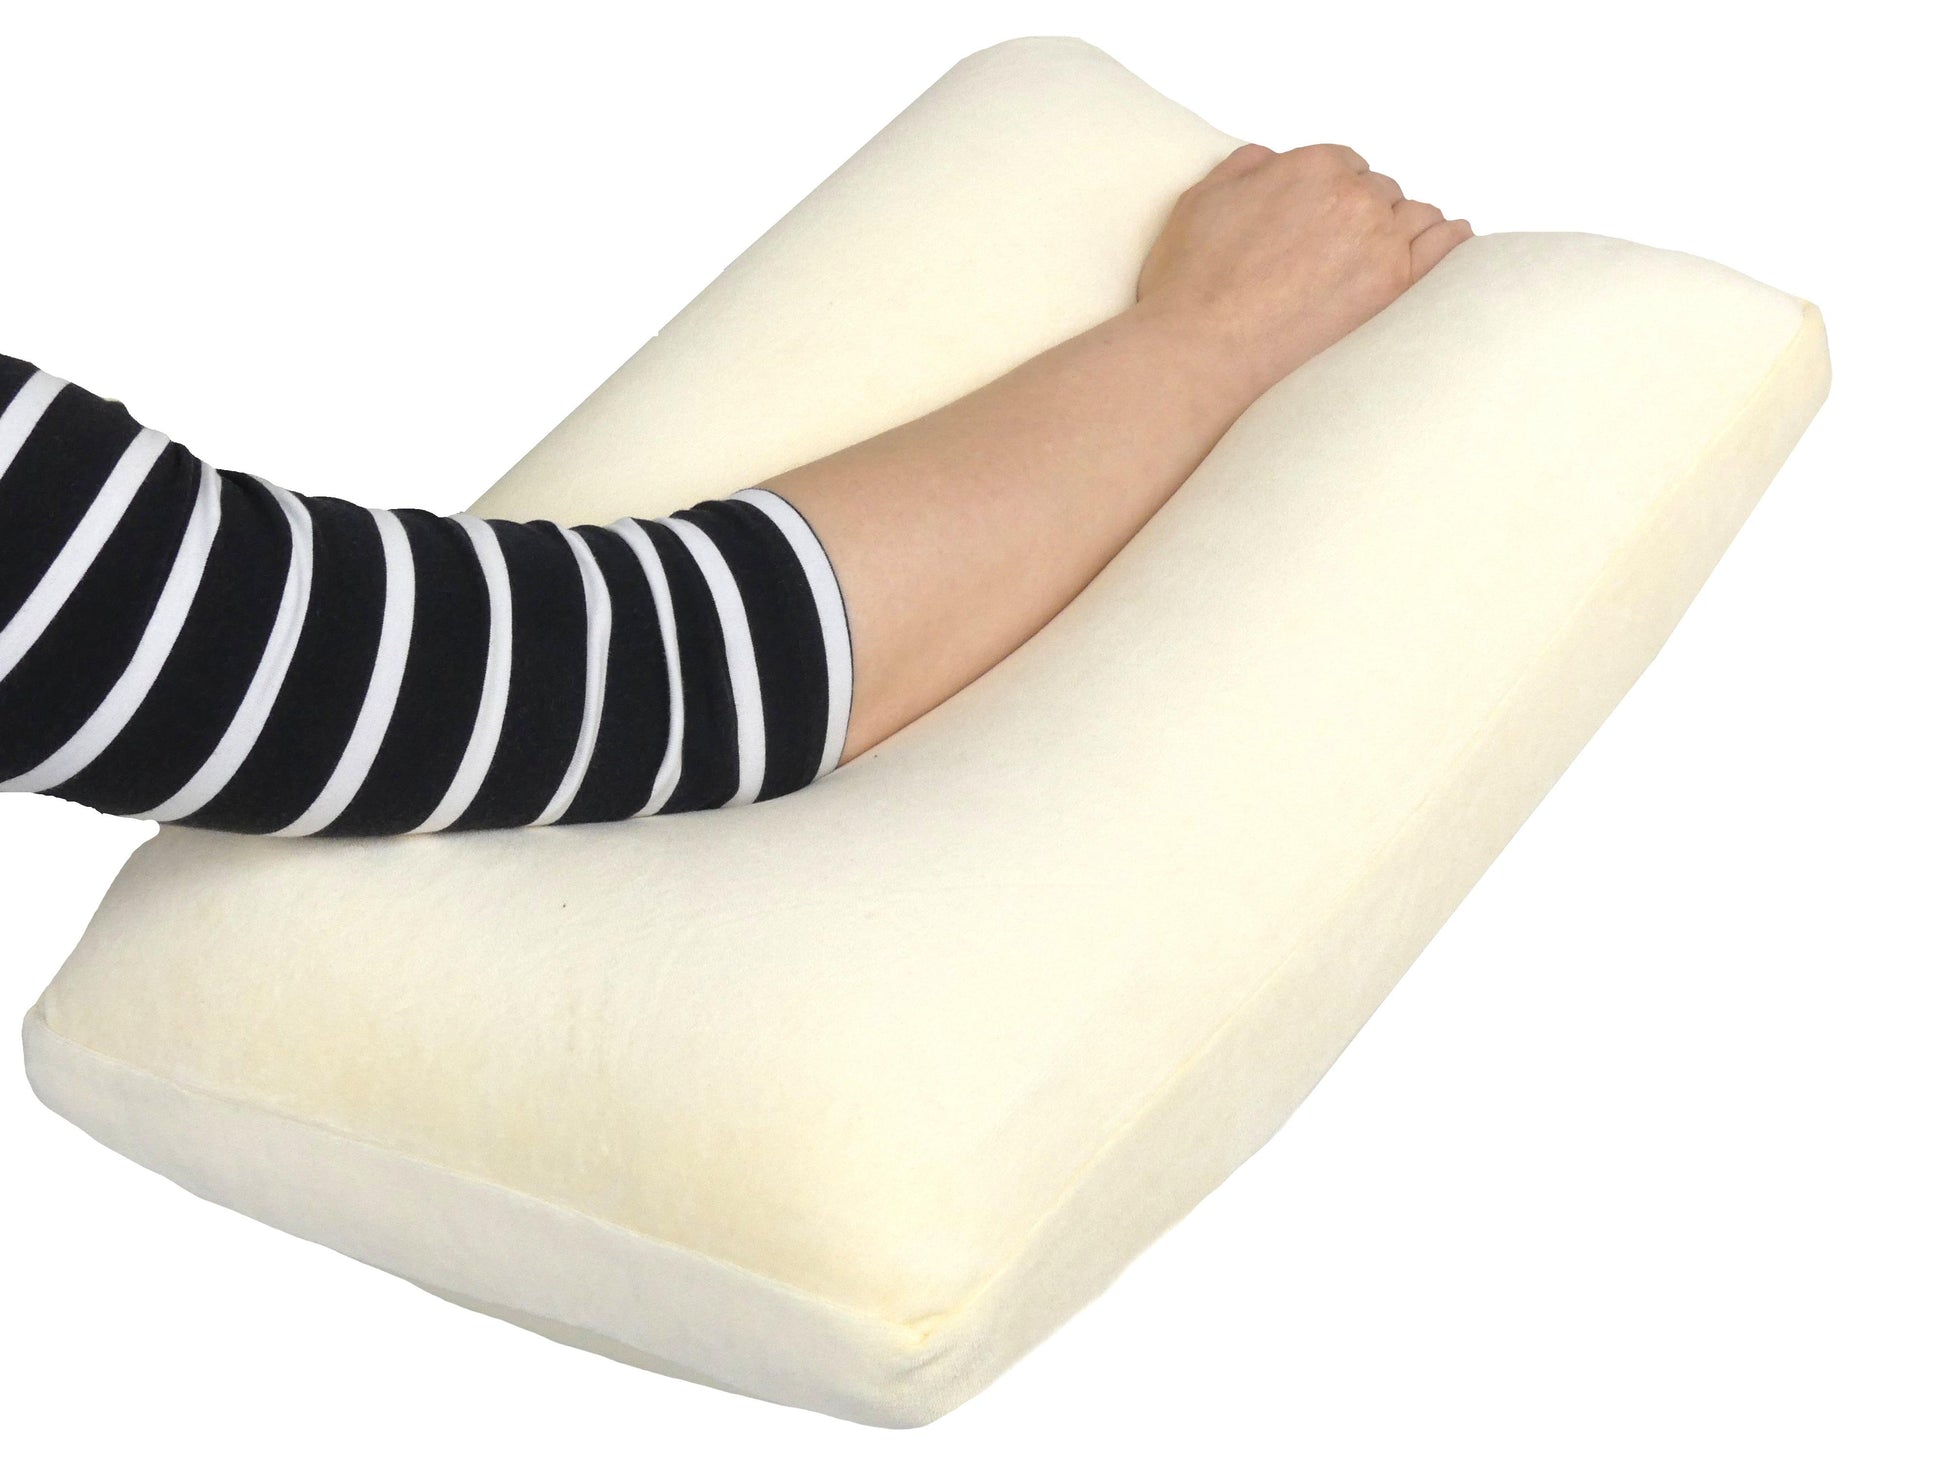 Positioning and Pressure Care: Multi-Purpose Pillow with Head Protection Gusset - M103 - MEDORIS